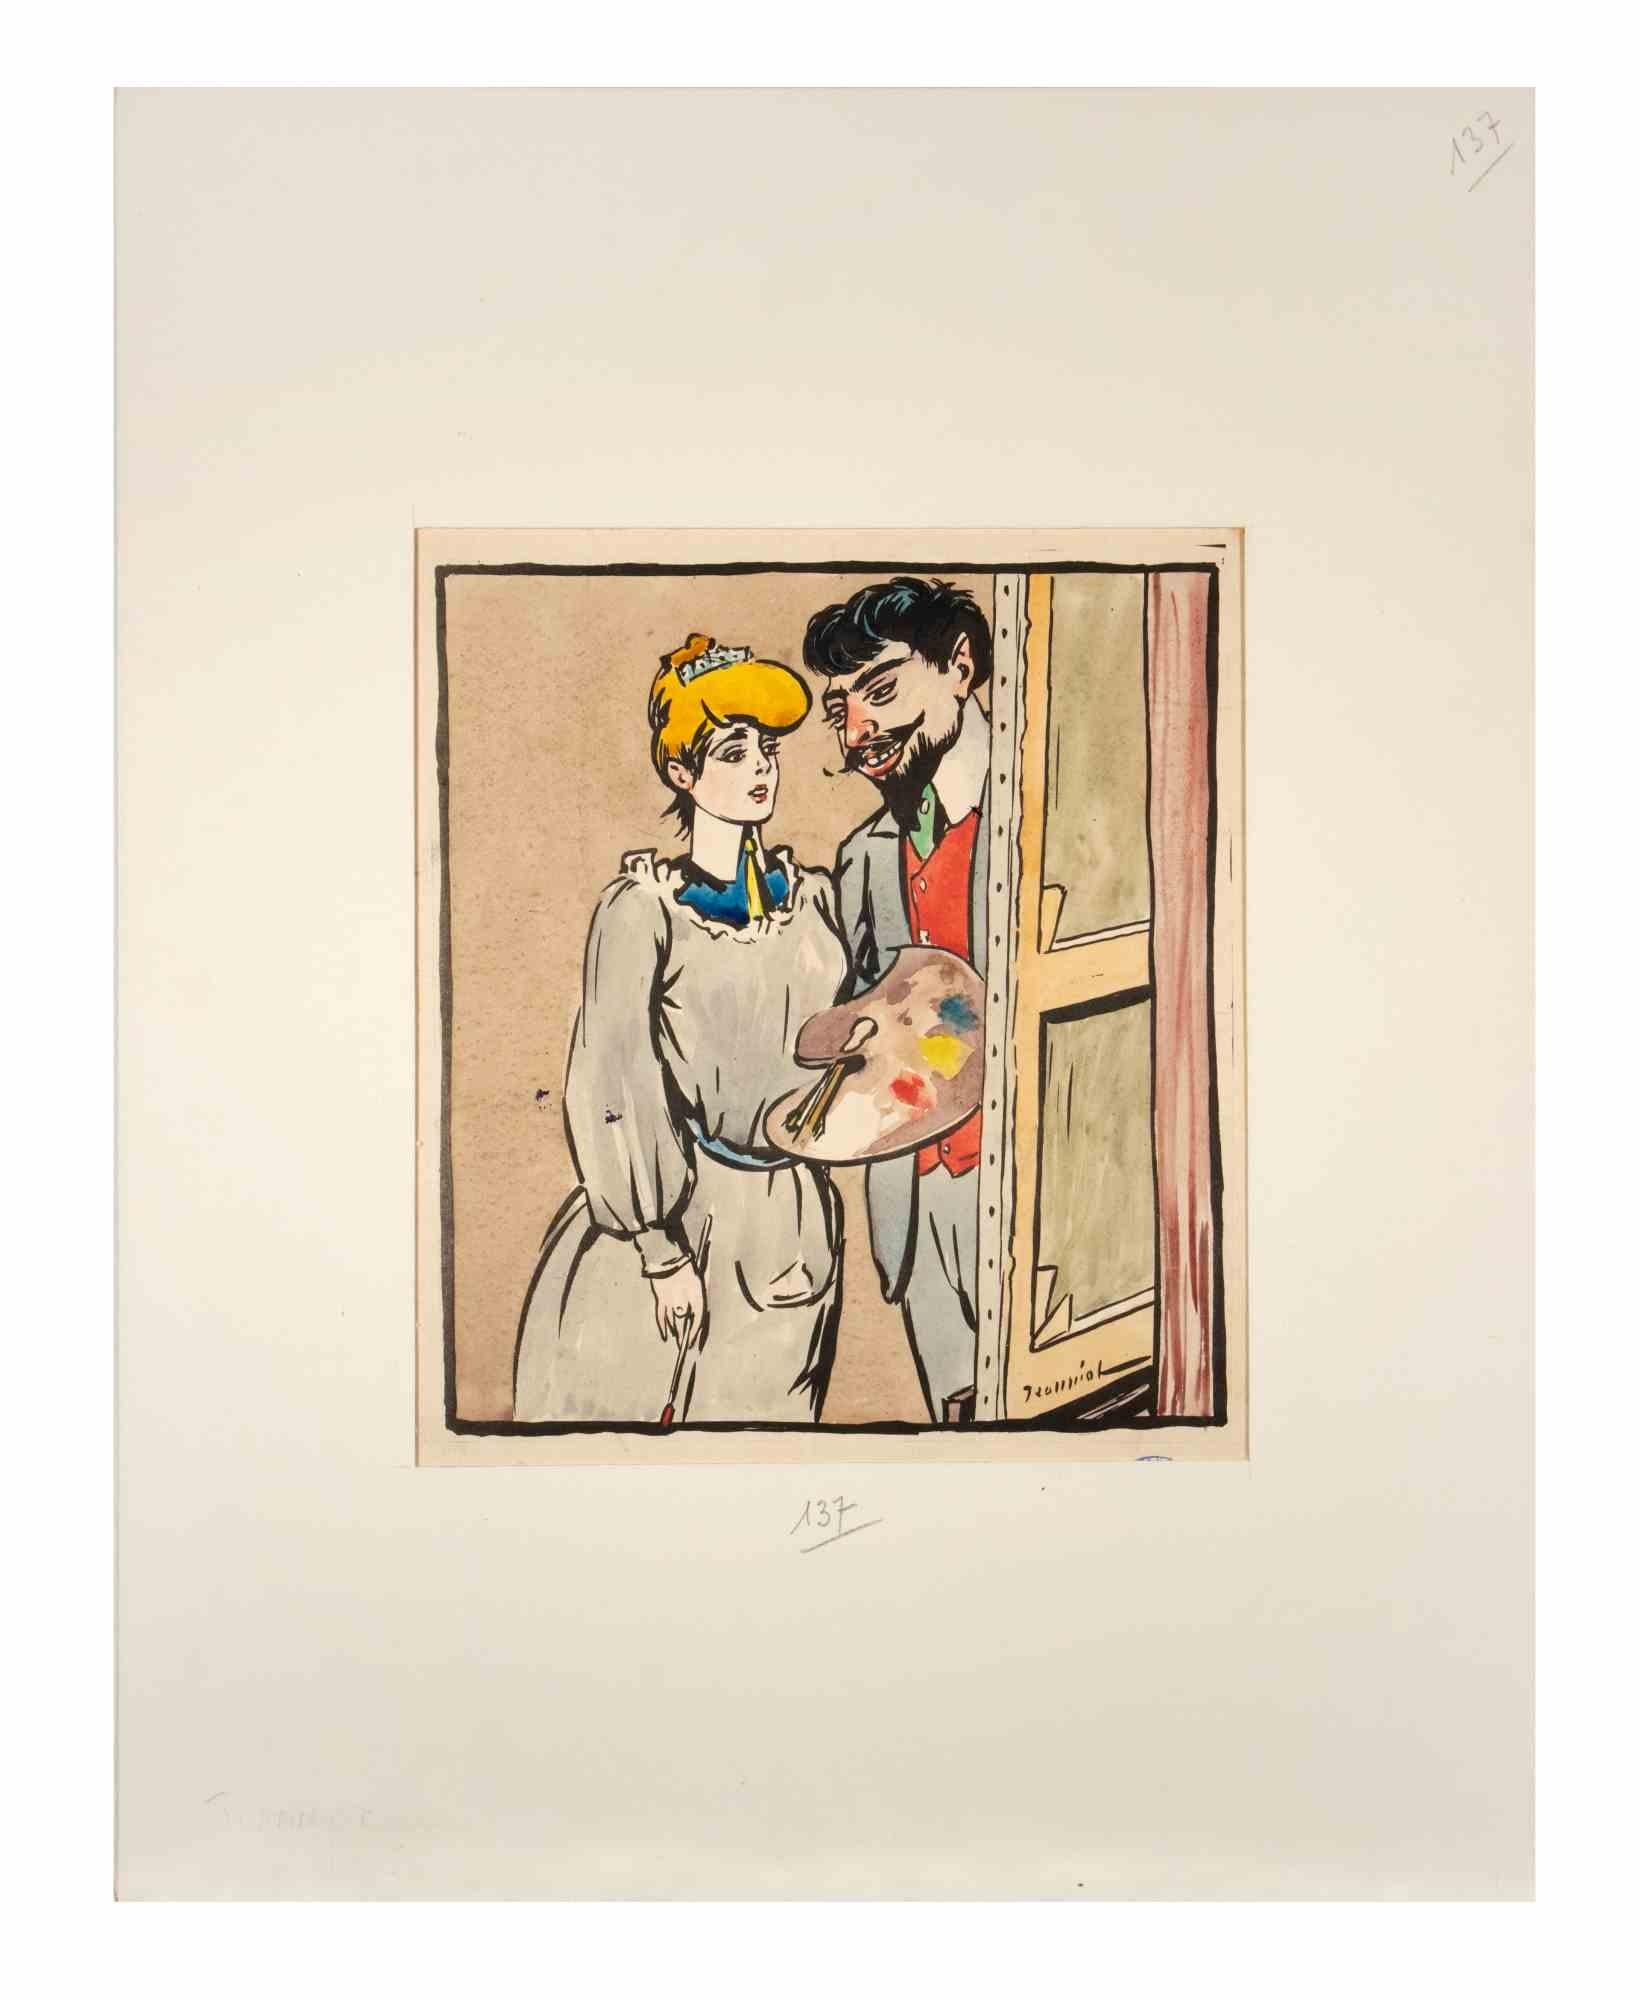 To the Painter is an ink and Watercolor realized by Pierre Georges Jeanniot in 1904, for the magazine "Rire".

Good condition on a yellowed paper.

Stamp signed on the lower riht corner.

Included a cream colored cardboard passpartout (44x34.5